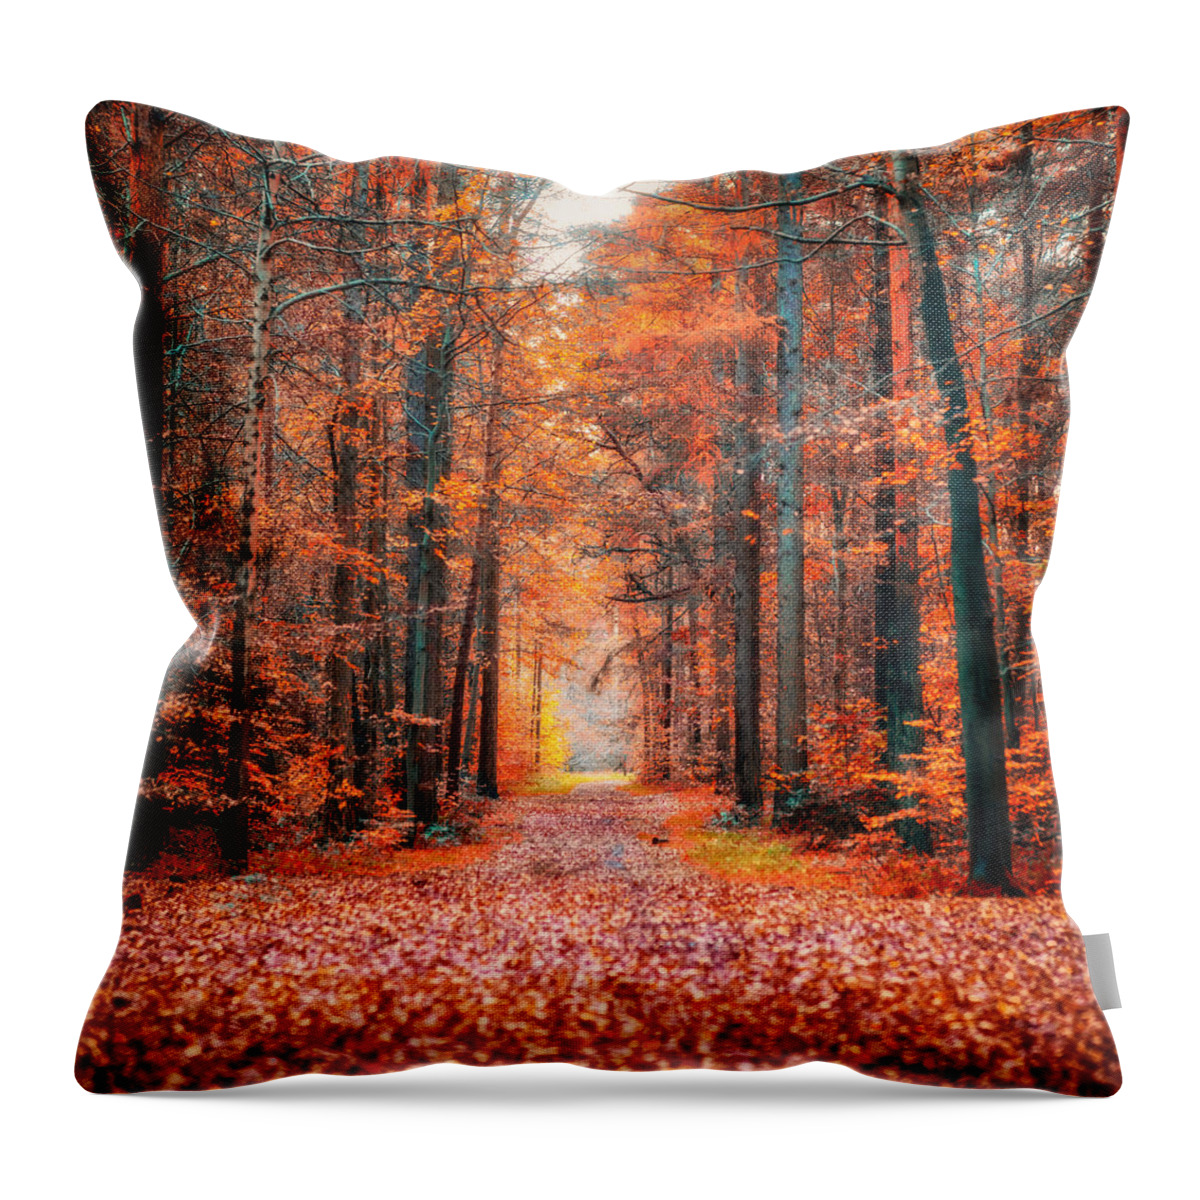 Autumn Throw Pillow featuring the photograph Thetford Forest by James Billings